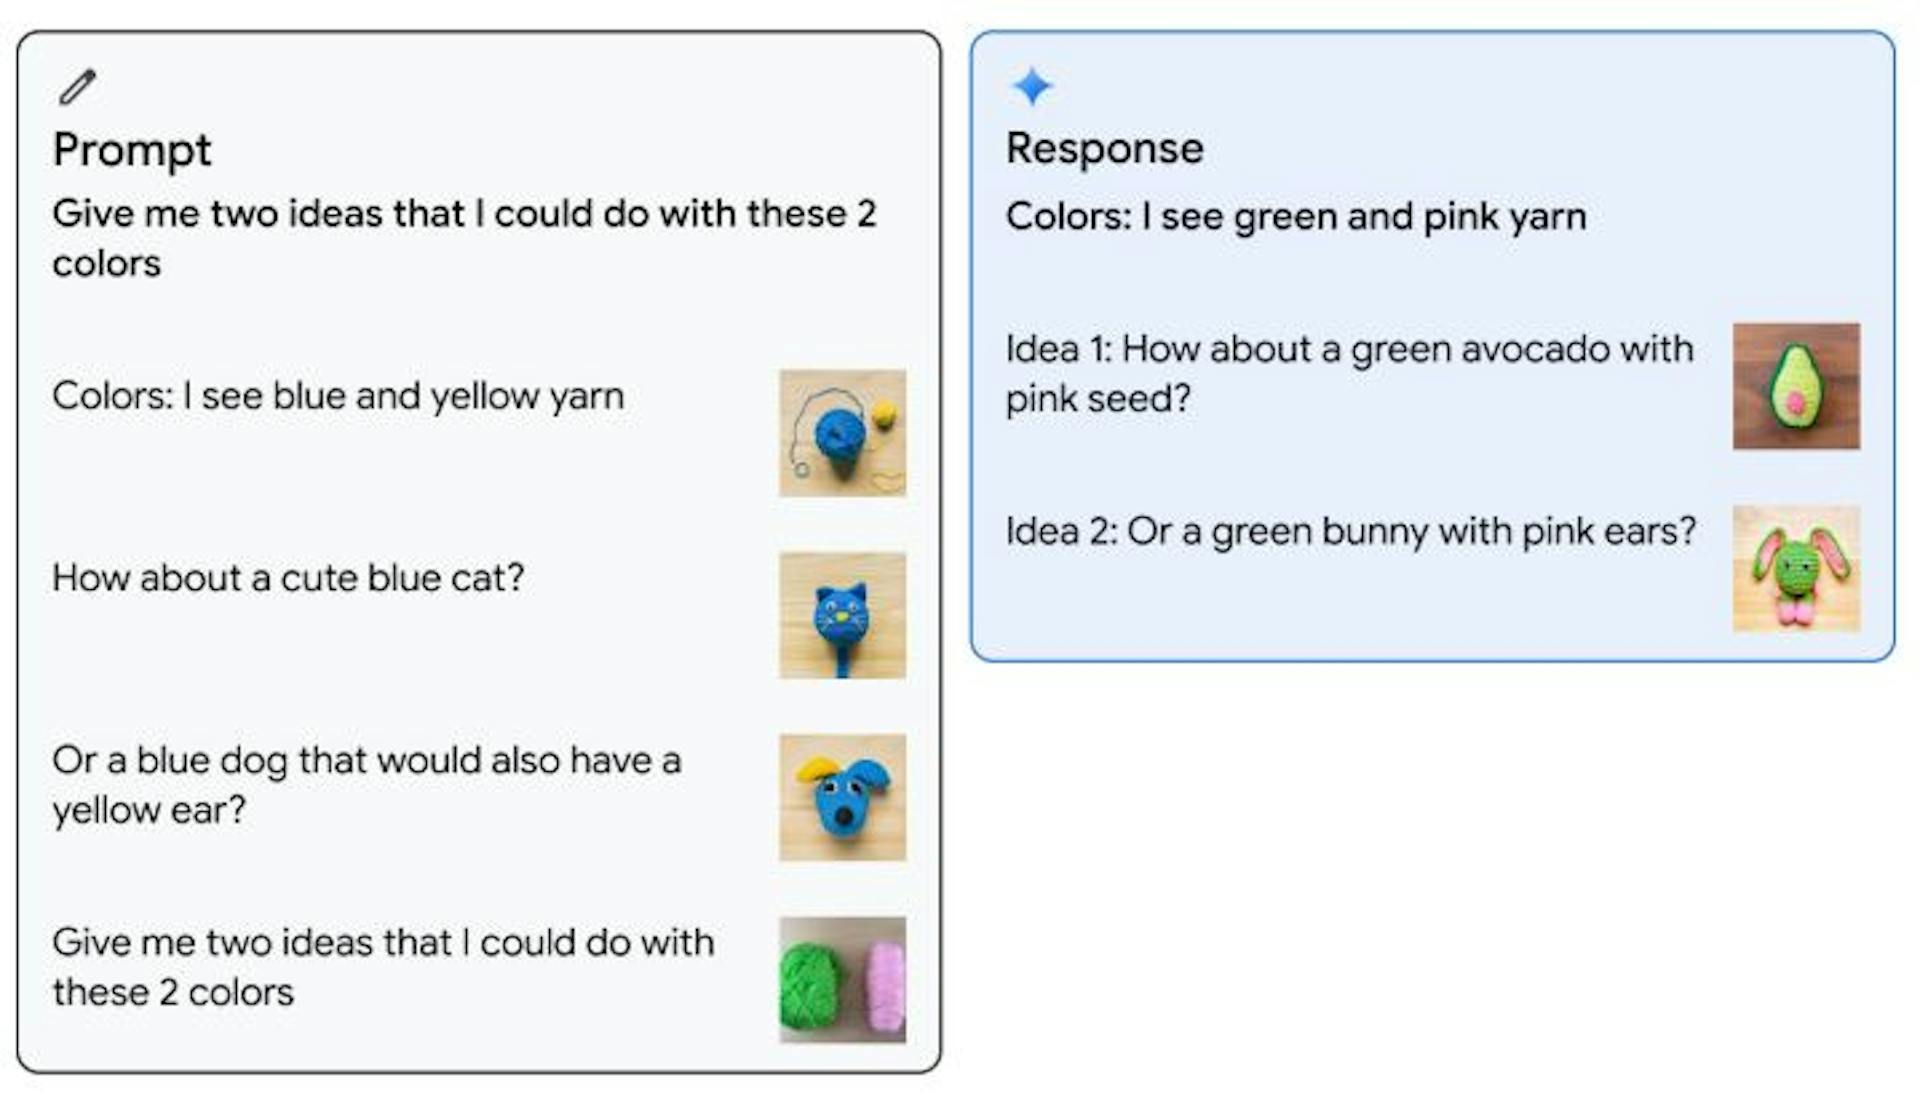 Figure 6 | Image Generation. Gemini can output multiple images interleaved with text given a prompt composed of image and text. In the left figure, Gemini Ultra is prompted in a 1-shot setting with a user example of generating suggestions of creating cat and dog from yarn when given two colors, blue and yellow. Then, the model is prompted to generate creative suggestions with two new colors, pink and green, and it generates images of creative suggestions to make a cute green avocado with pink seed or a green bunny with pink ears from yarn as shown in the right figure.